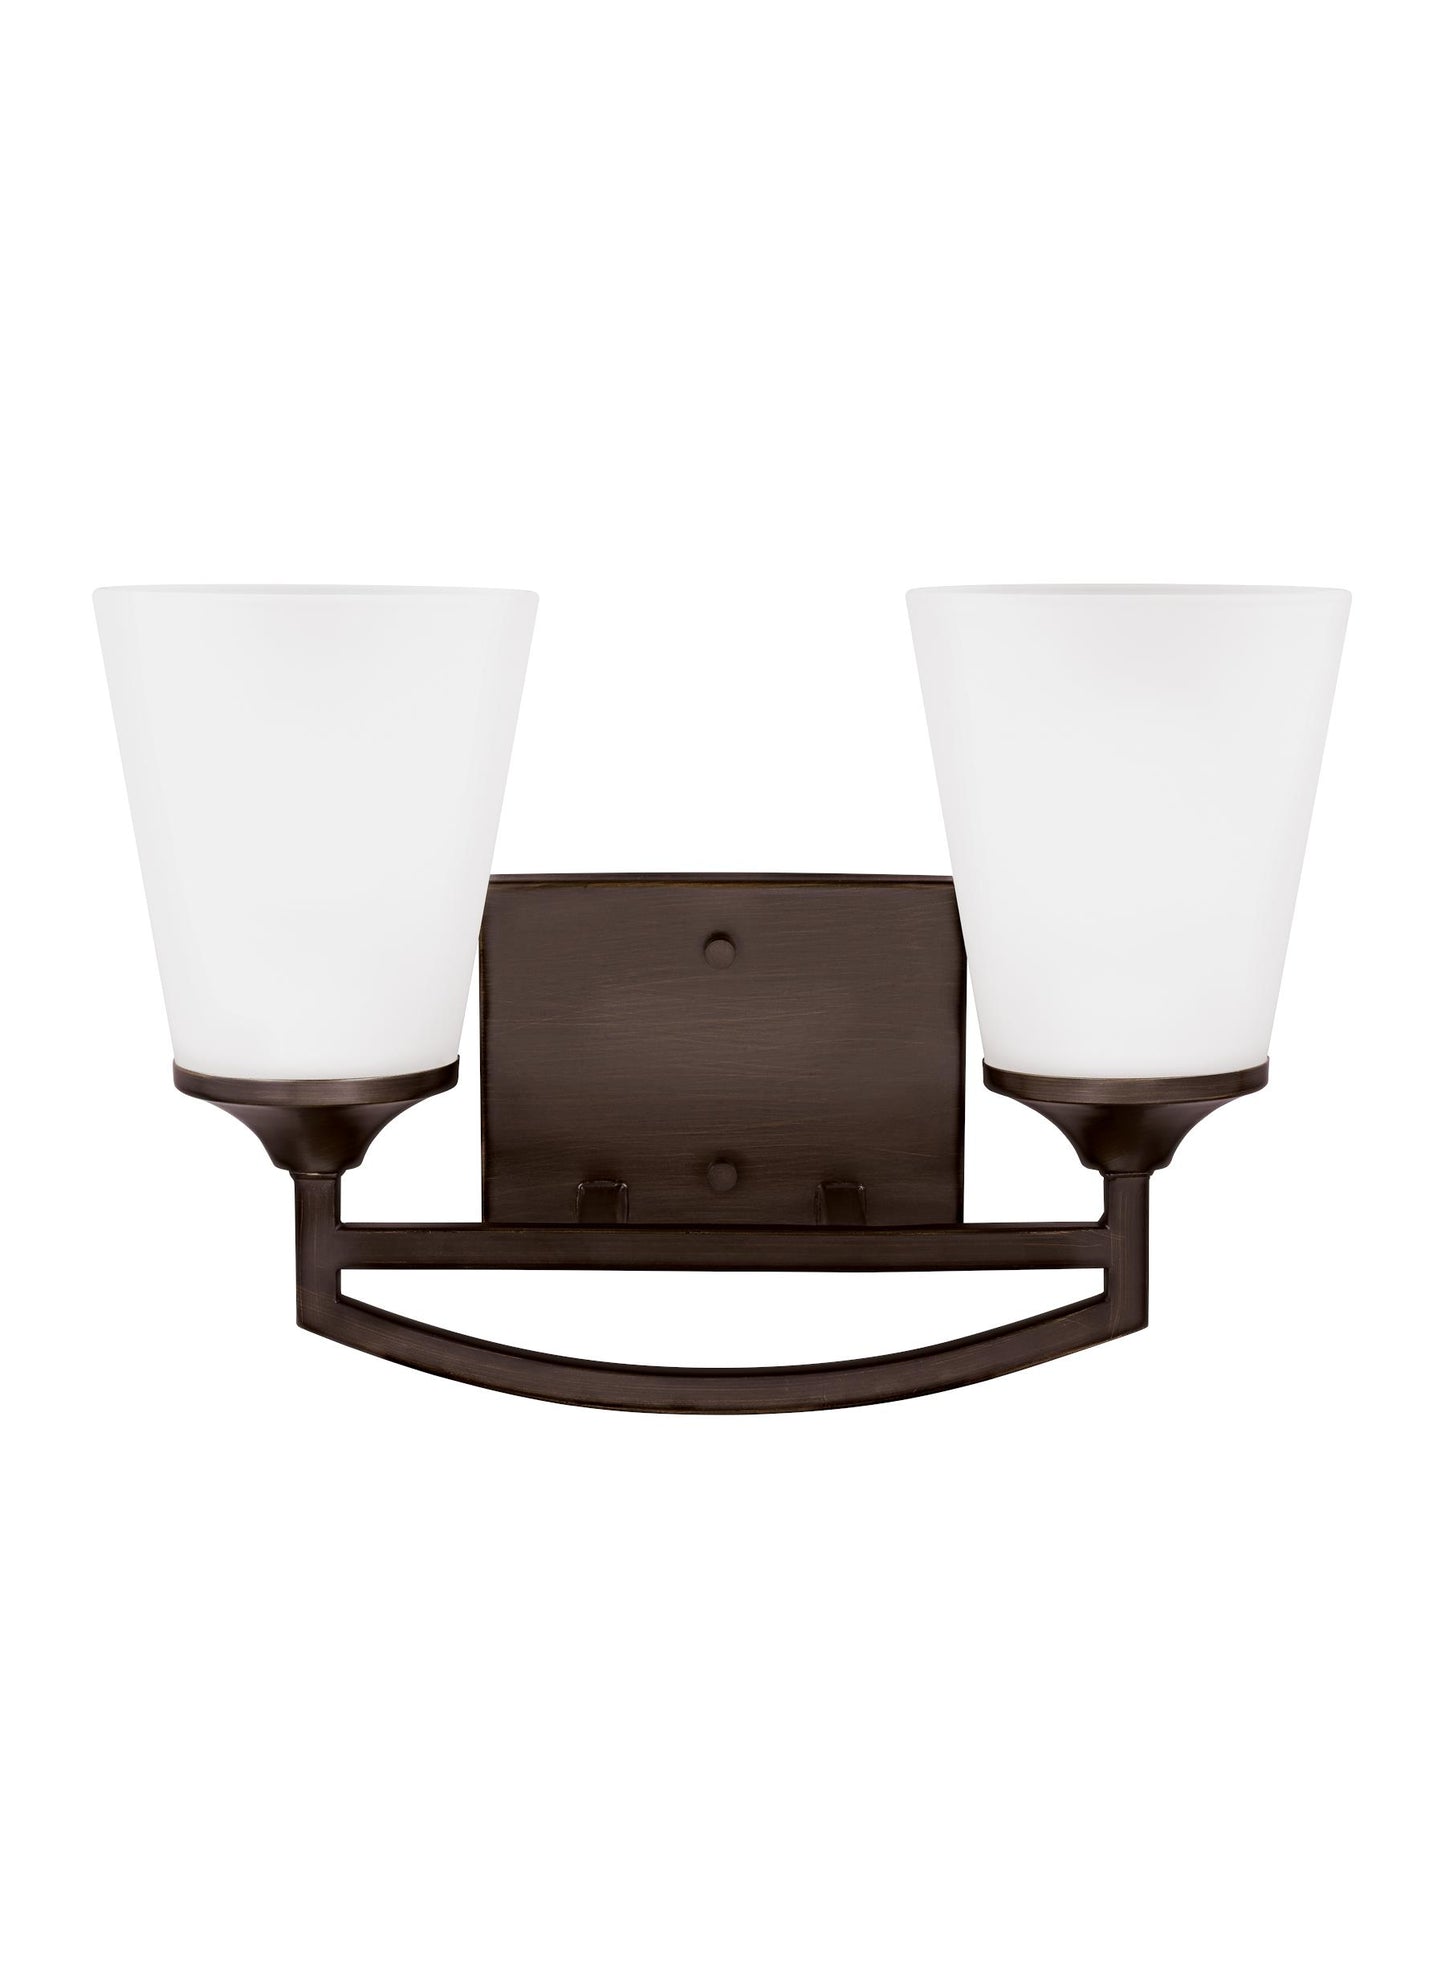 Hanford traditional 2-light indoor dimmable bath vanity wall sconce in bronze finish with satin etched glass shades